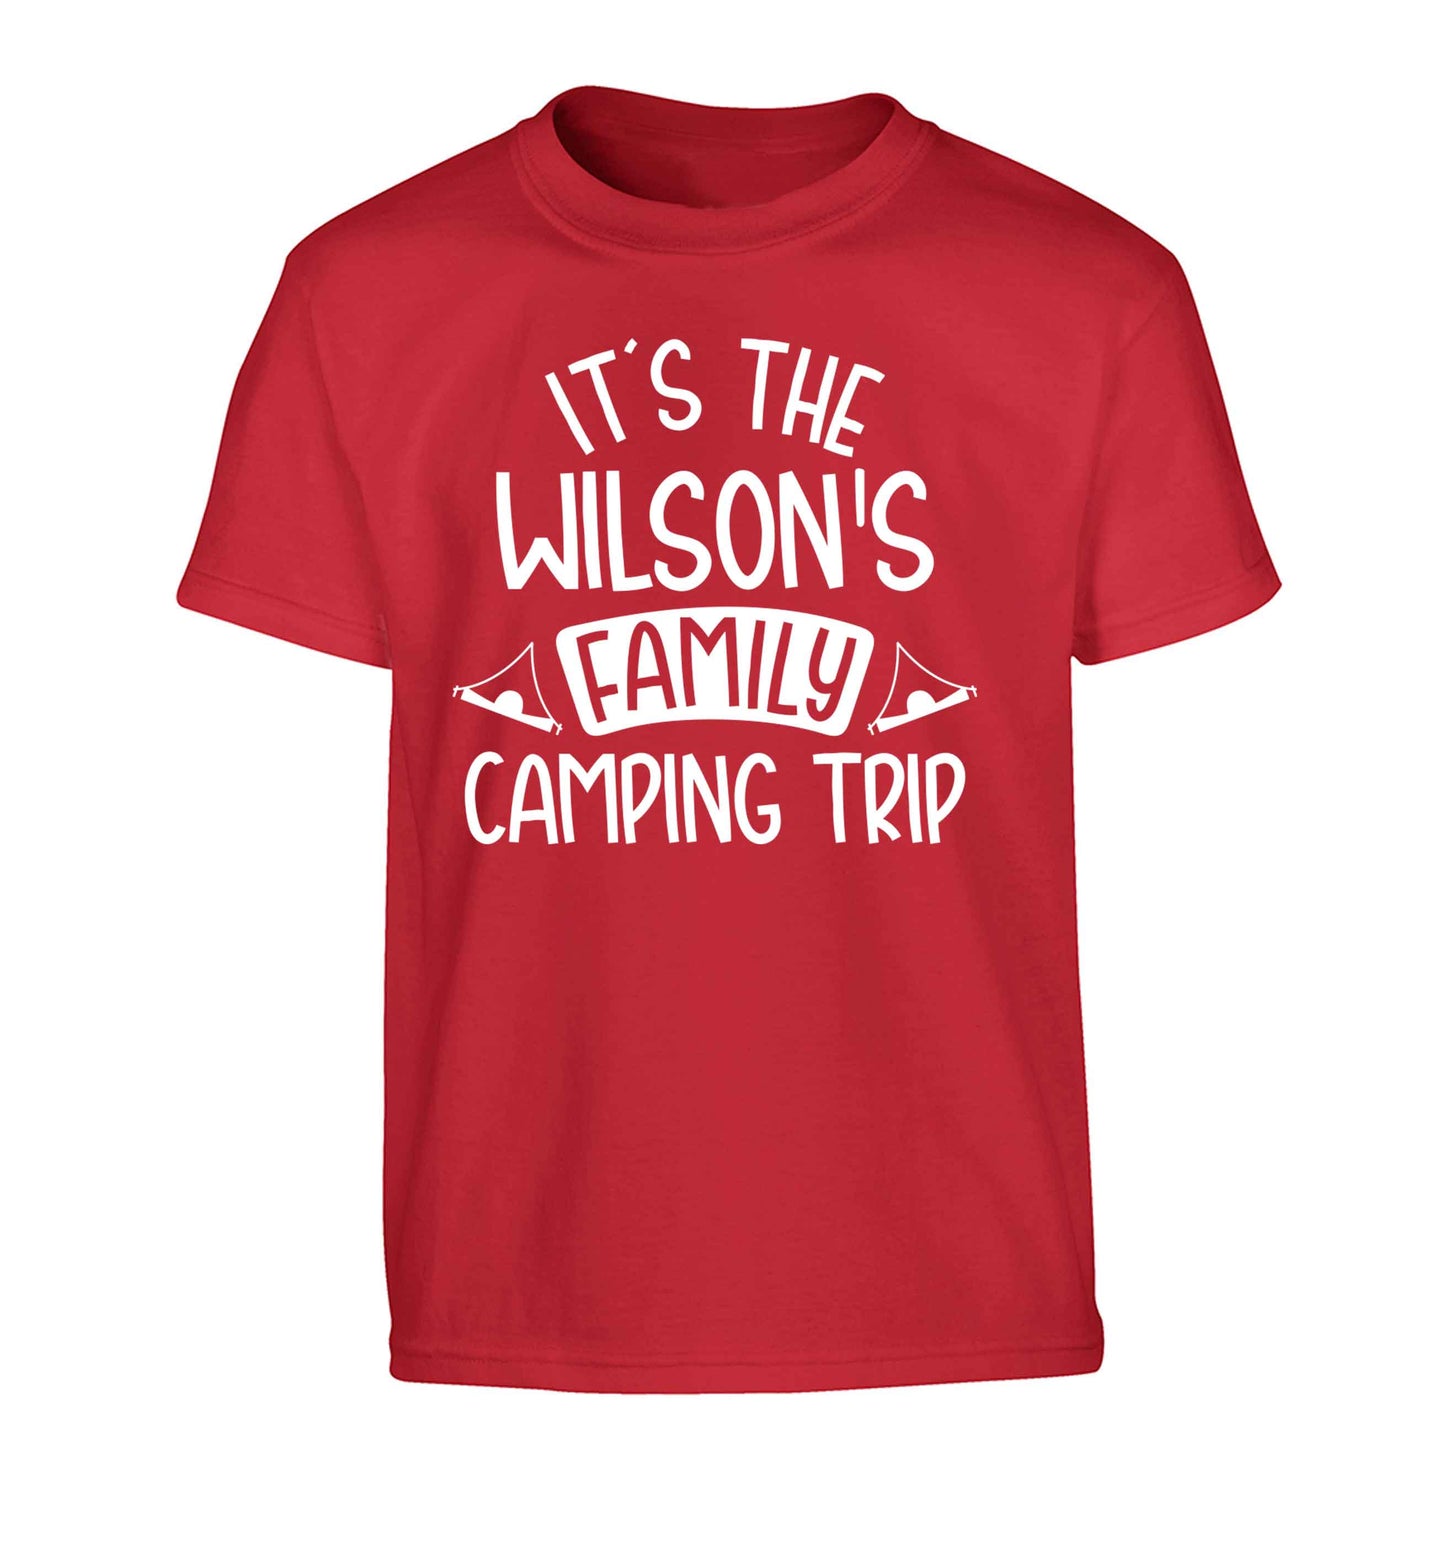 It's the Wilson's family camping trip personalised Children's red Tshirt 12-13 Years